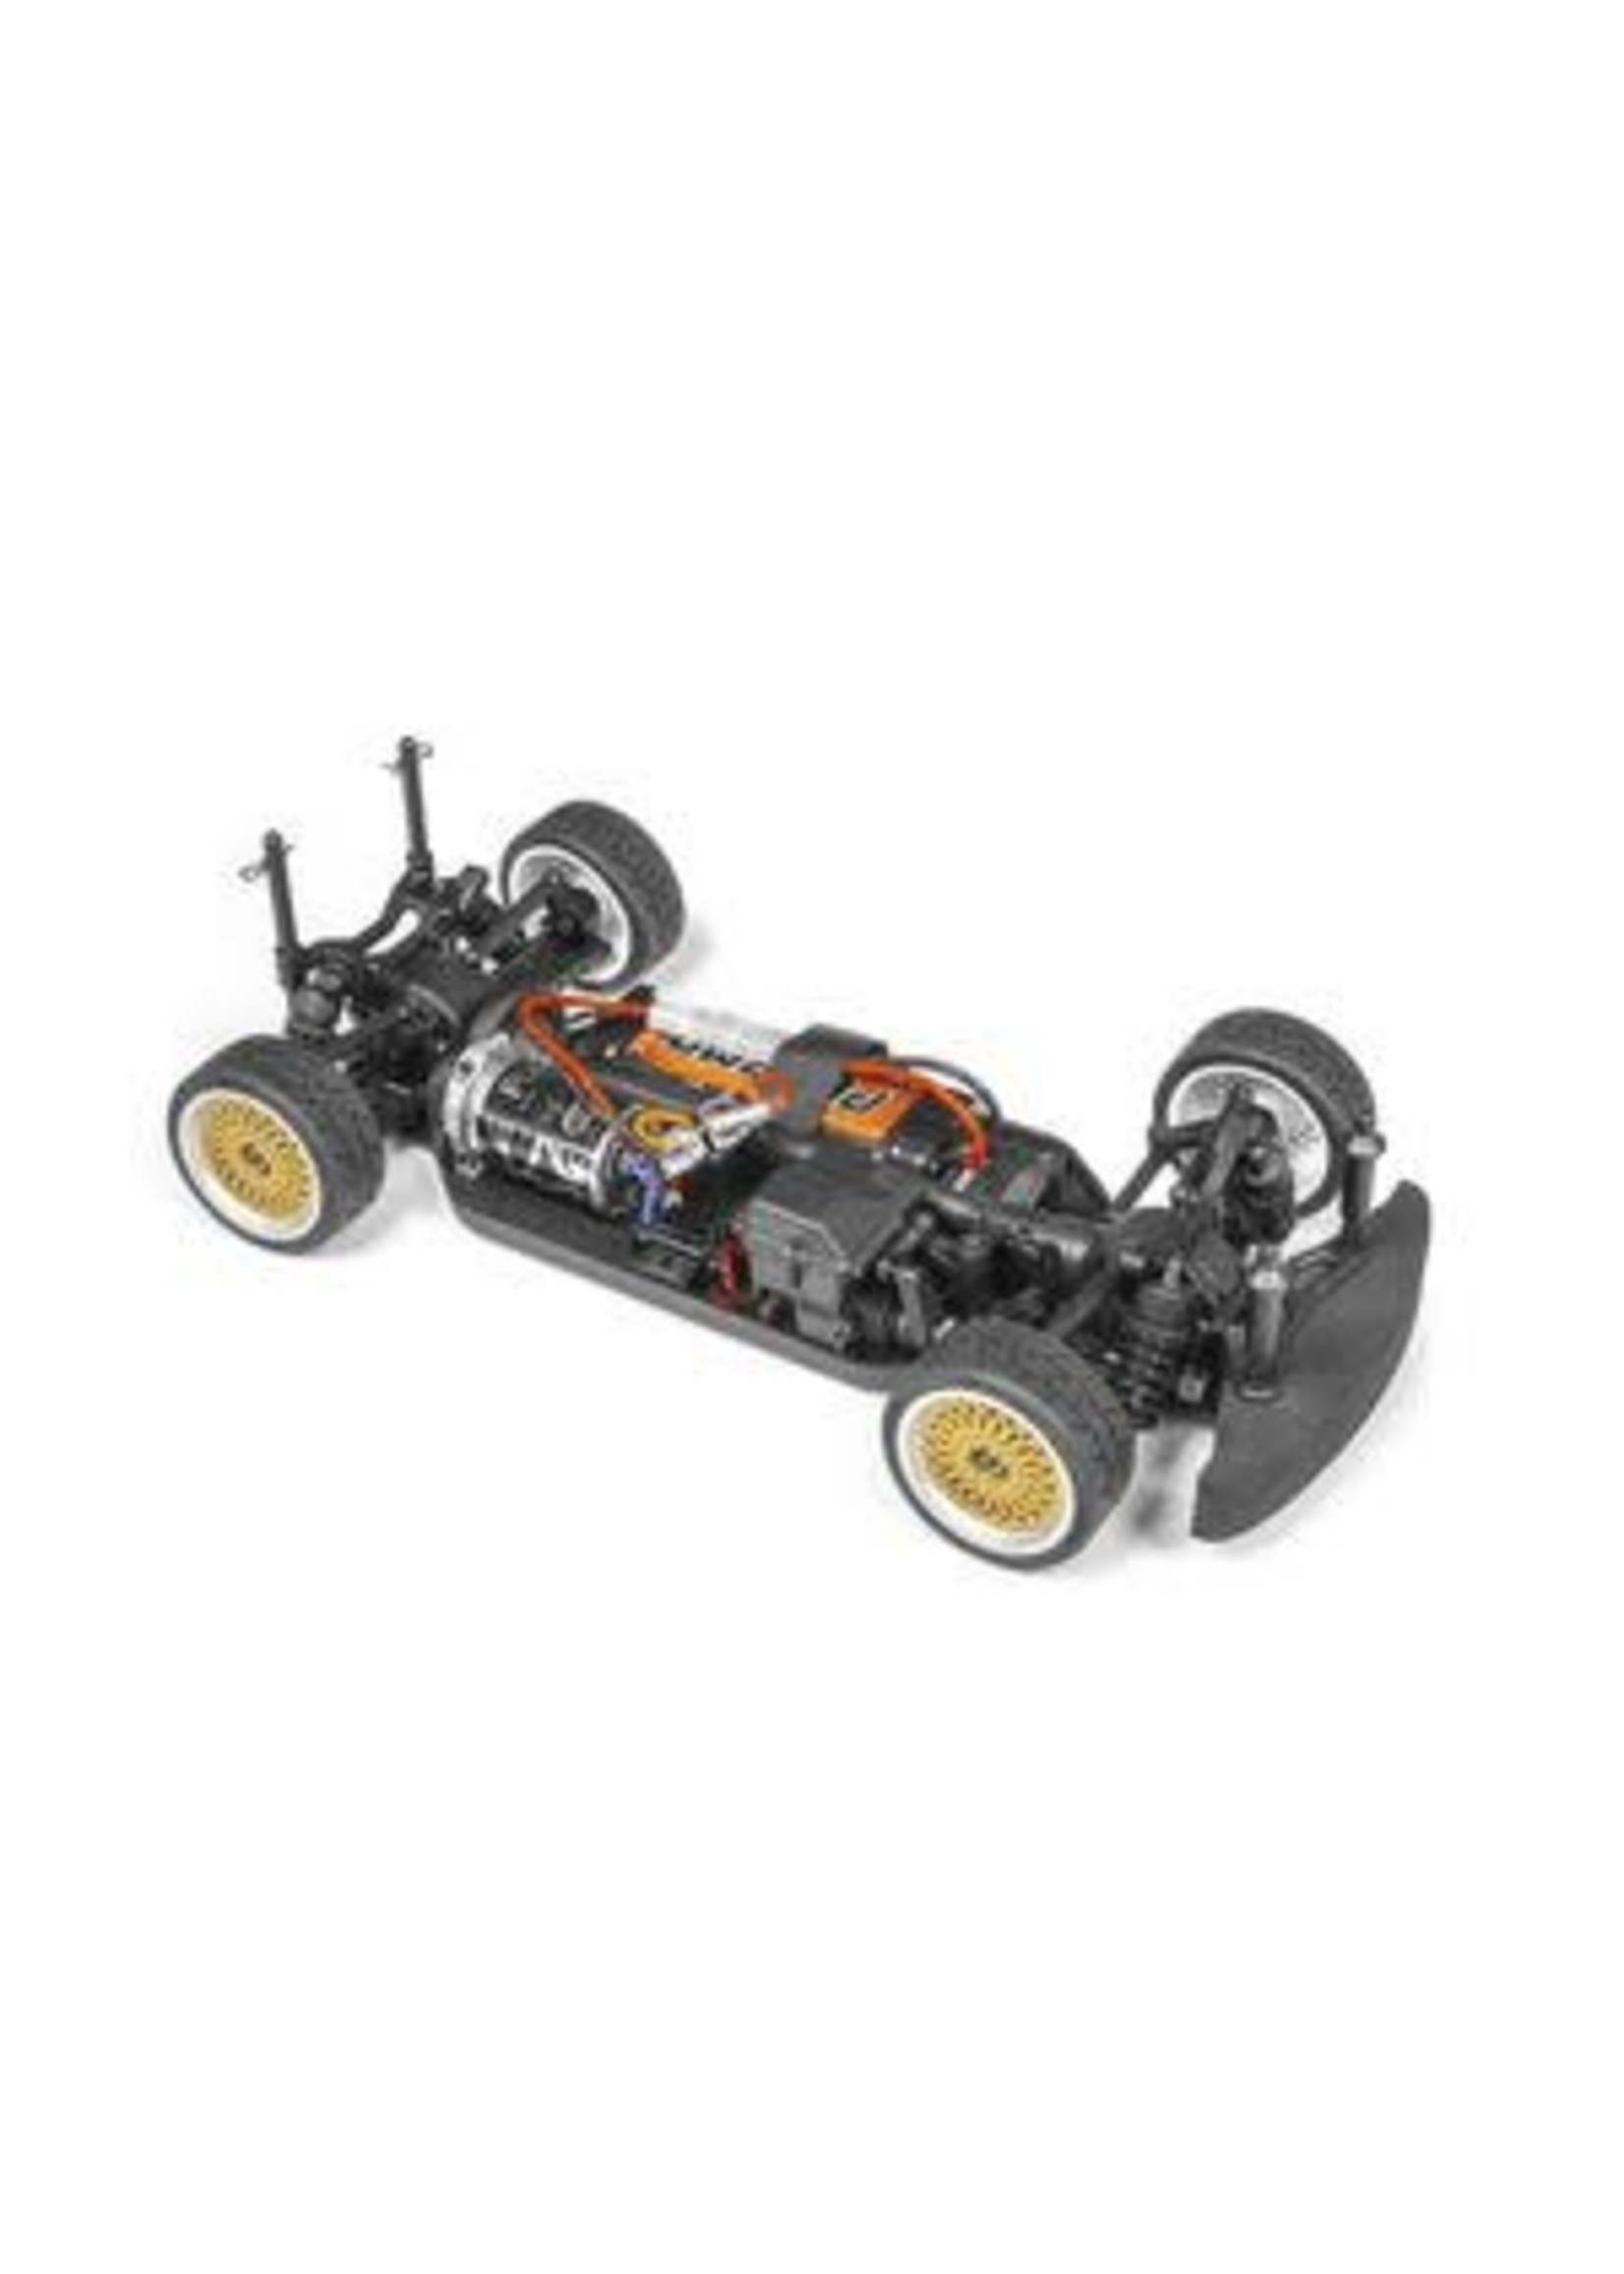 HPI Racing HPI120103 RS4 Sport 3 Warsteiner BMW M3 E30 RTR, 1/10, 4WD, w/2.4GHz Radio System, Battery & Charger